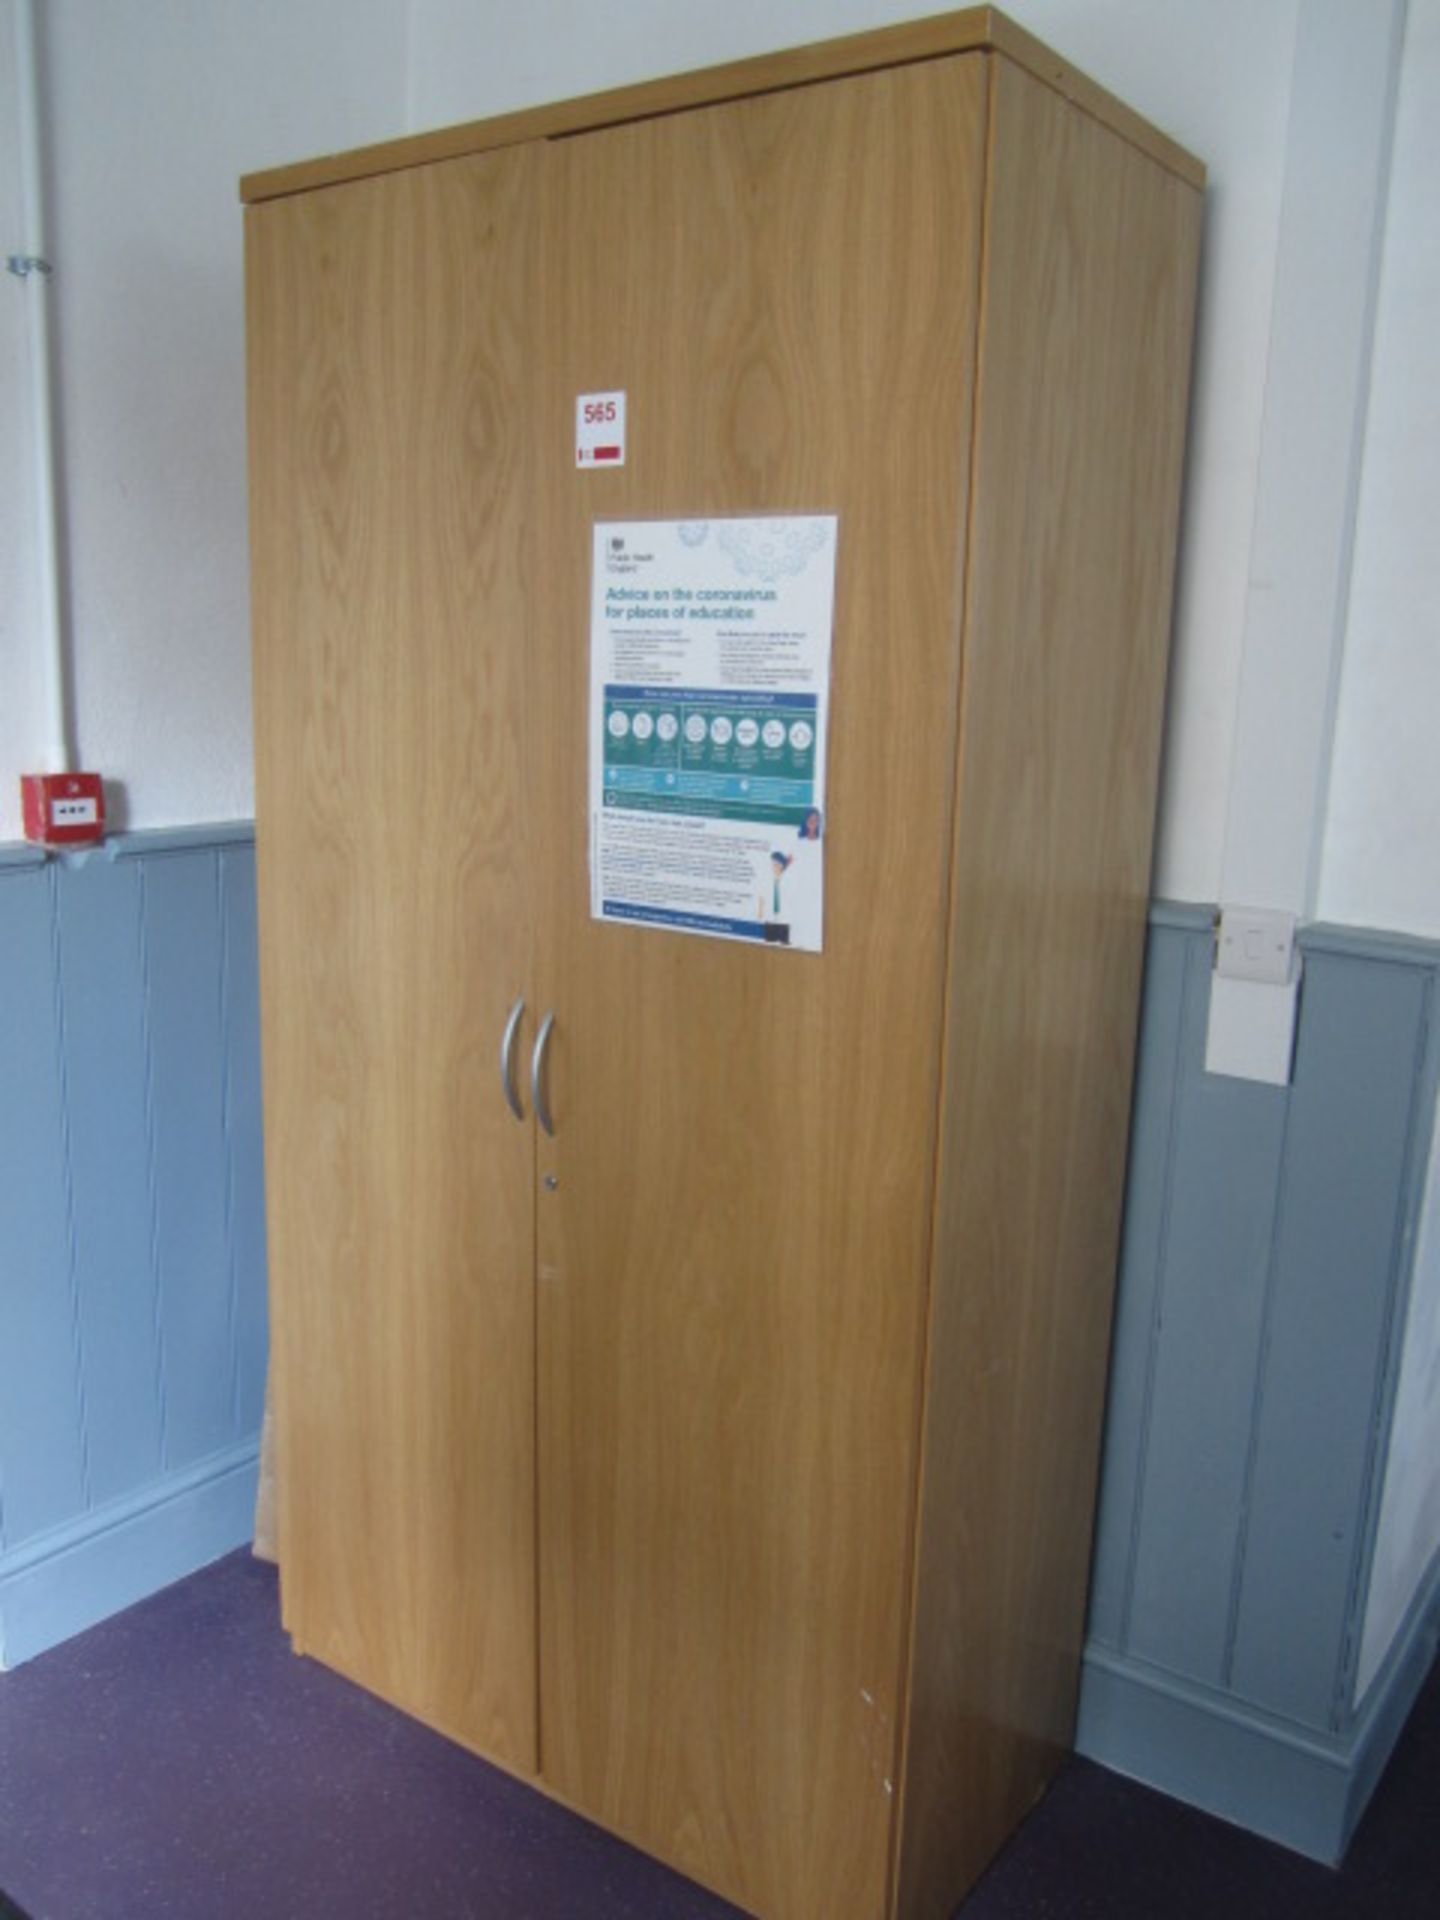 Lightwood effect meeting table and wood effect 2 door storage cupboard. Located at 6th form - Image 2 of 2